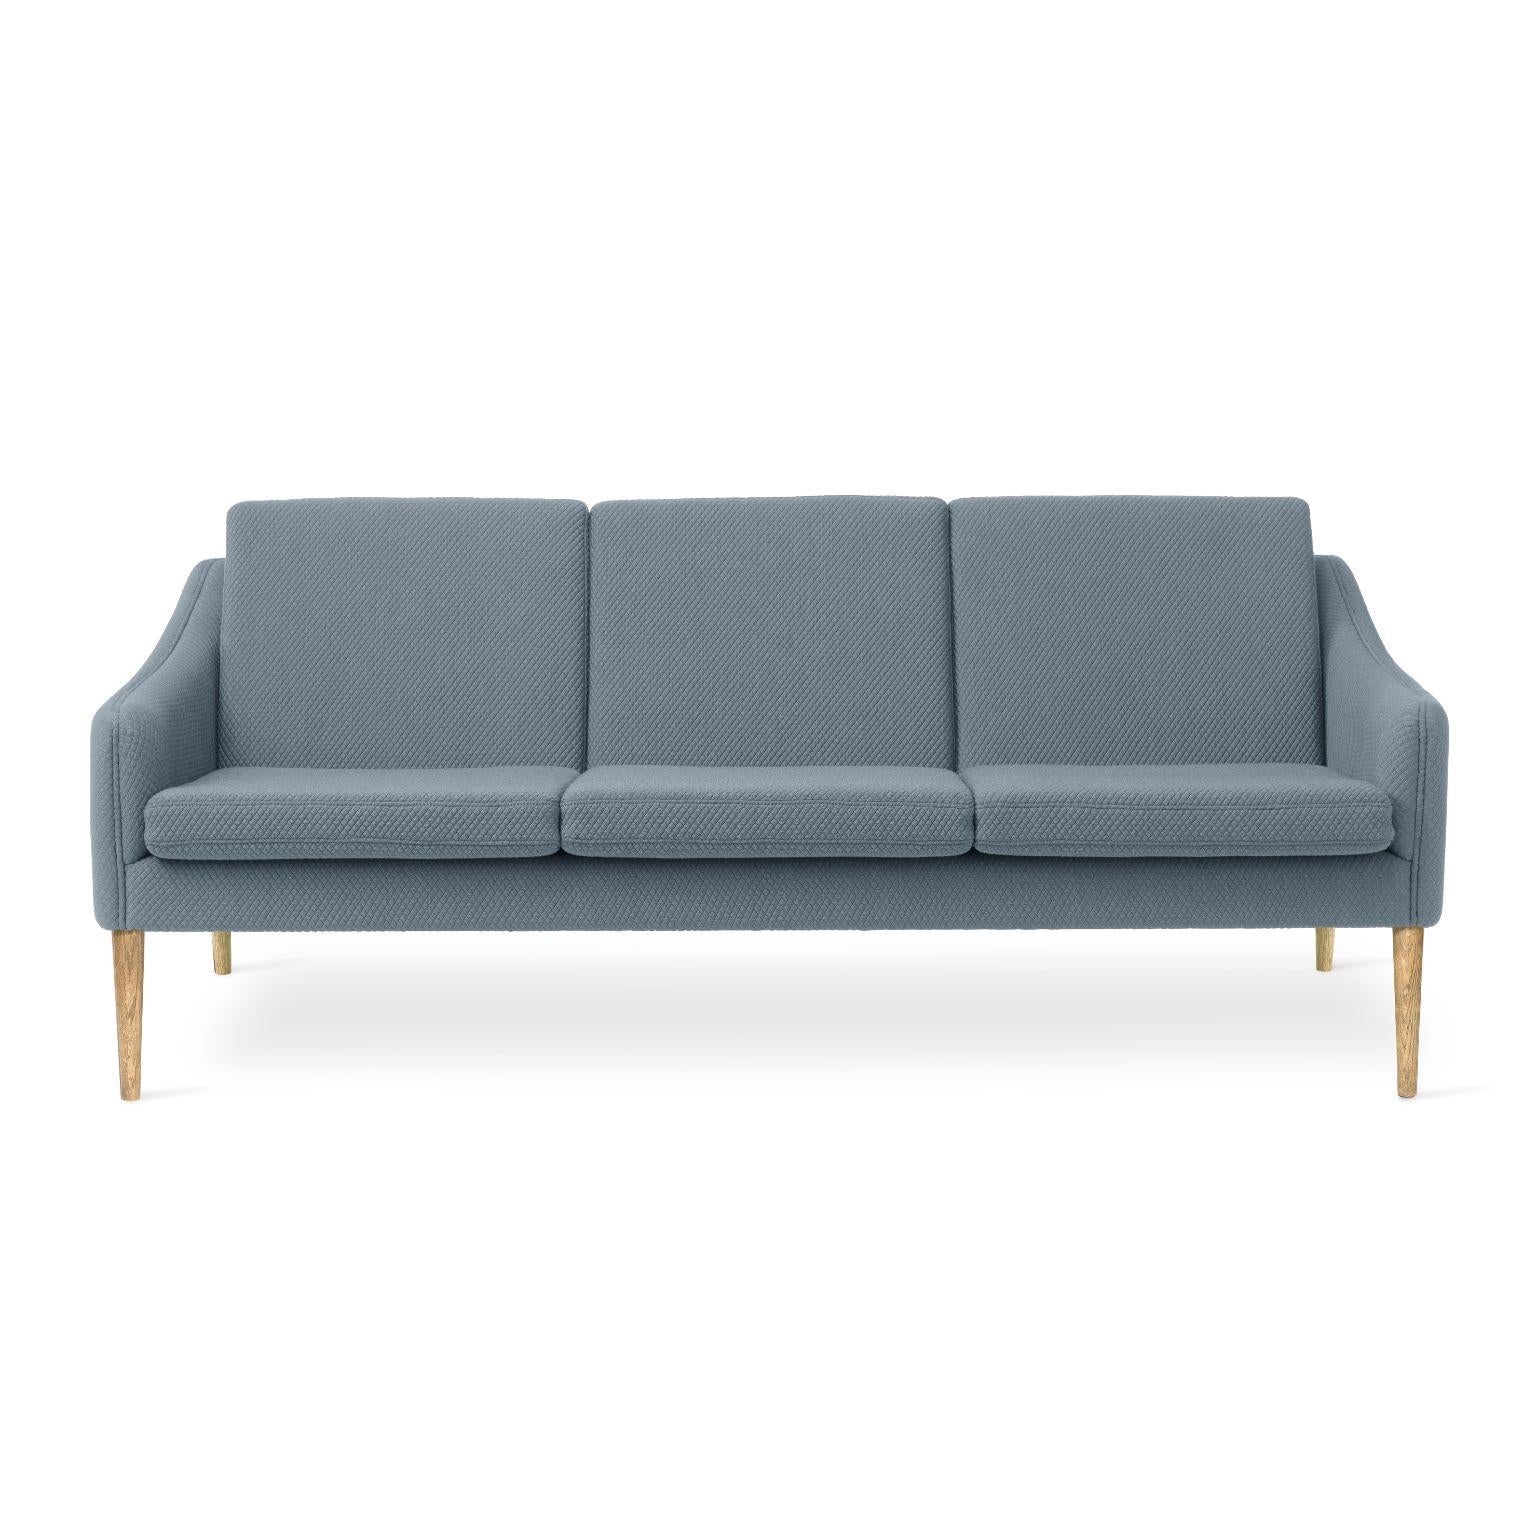 Mr Olsen 3 seater oak mosaic cloudy grey by Warm Nordic
Dimensions: D 201 x W 79 x H 78/46 cm
Material: Textile upholstery, Foam, Spring system, Solid oiled oak legs, Solid smoked oak legs
Weight: 50 kg
Also available in different colours and